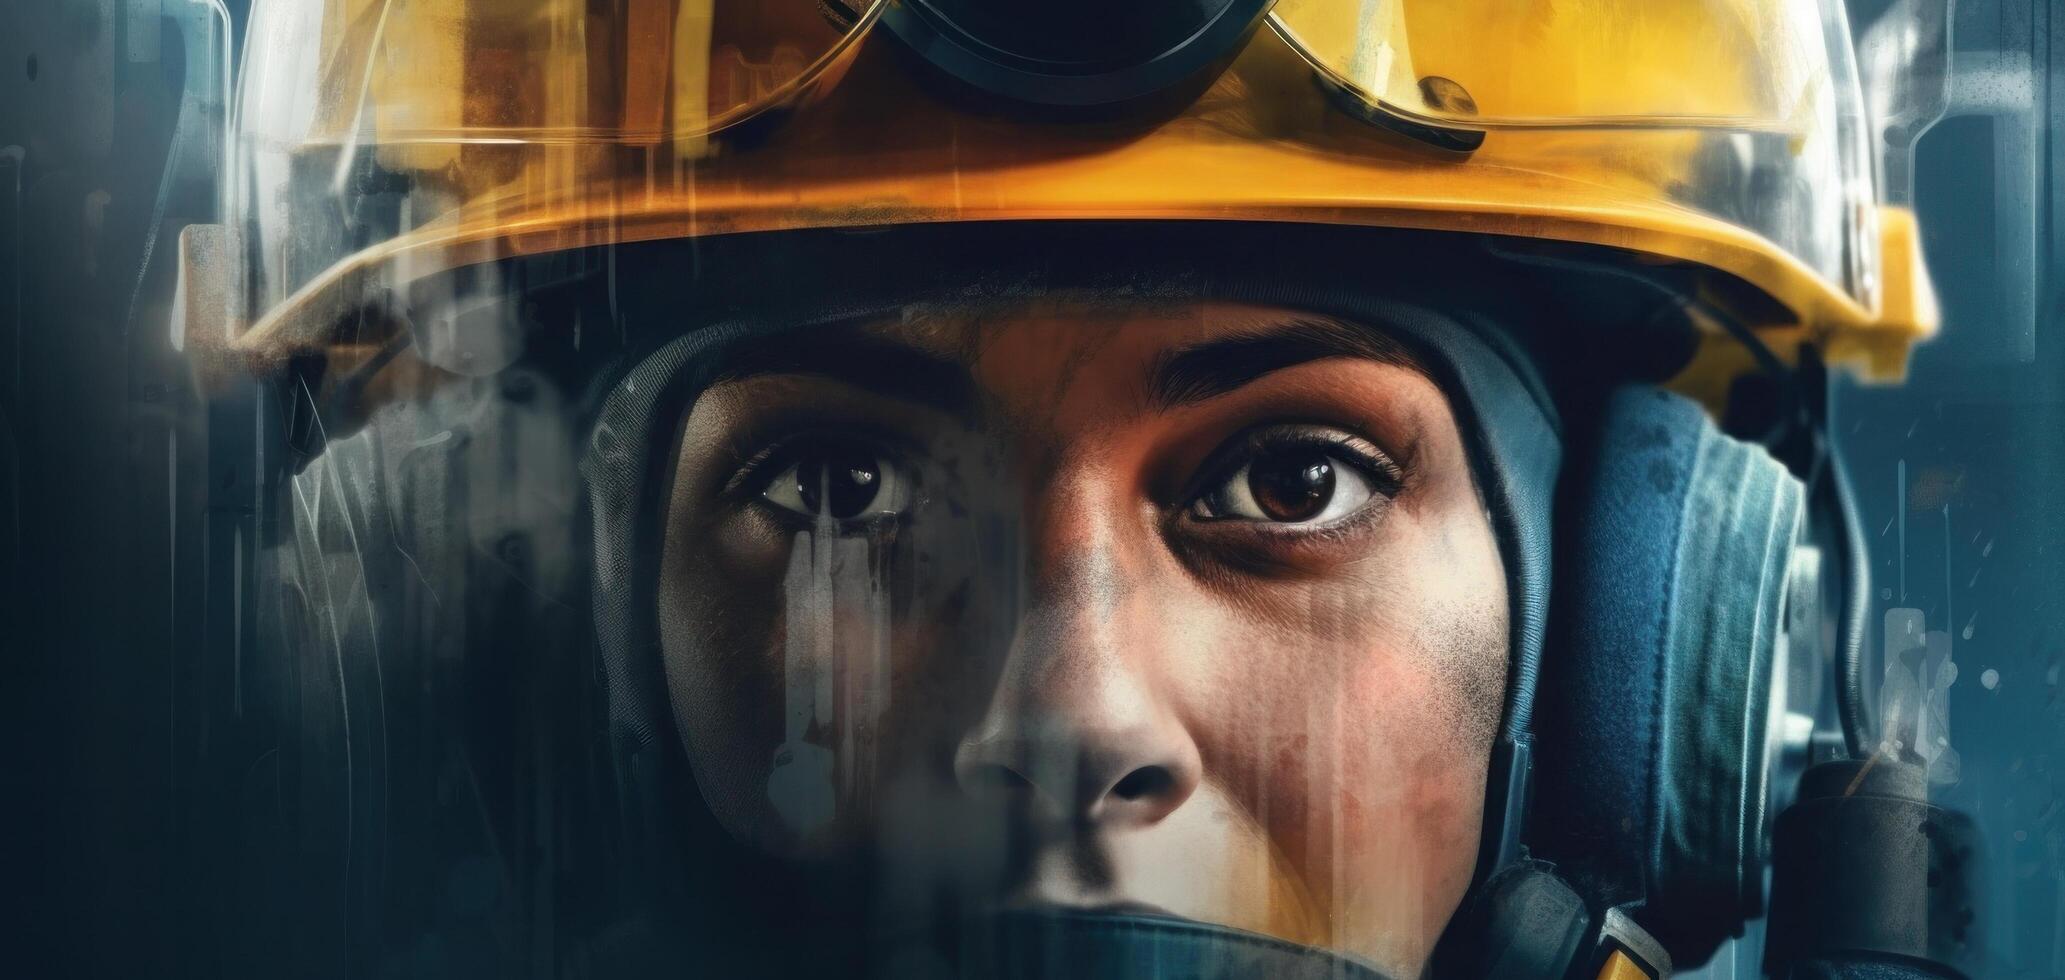 Industrial engineer in a yellow protective helmet. Illustration photo